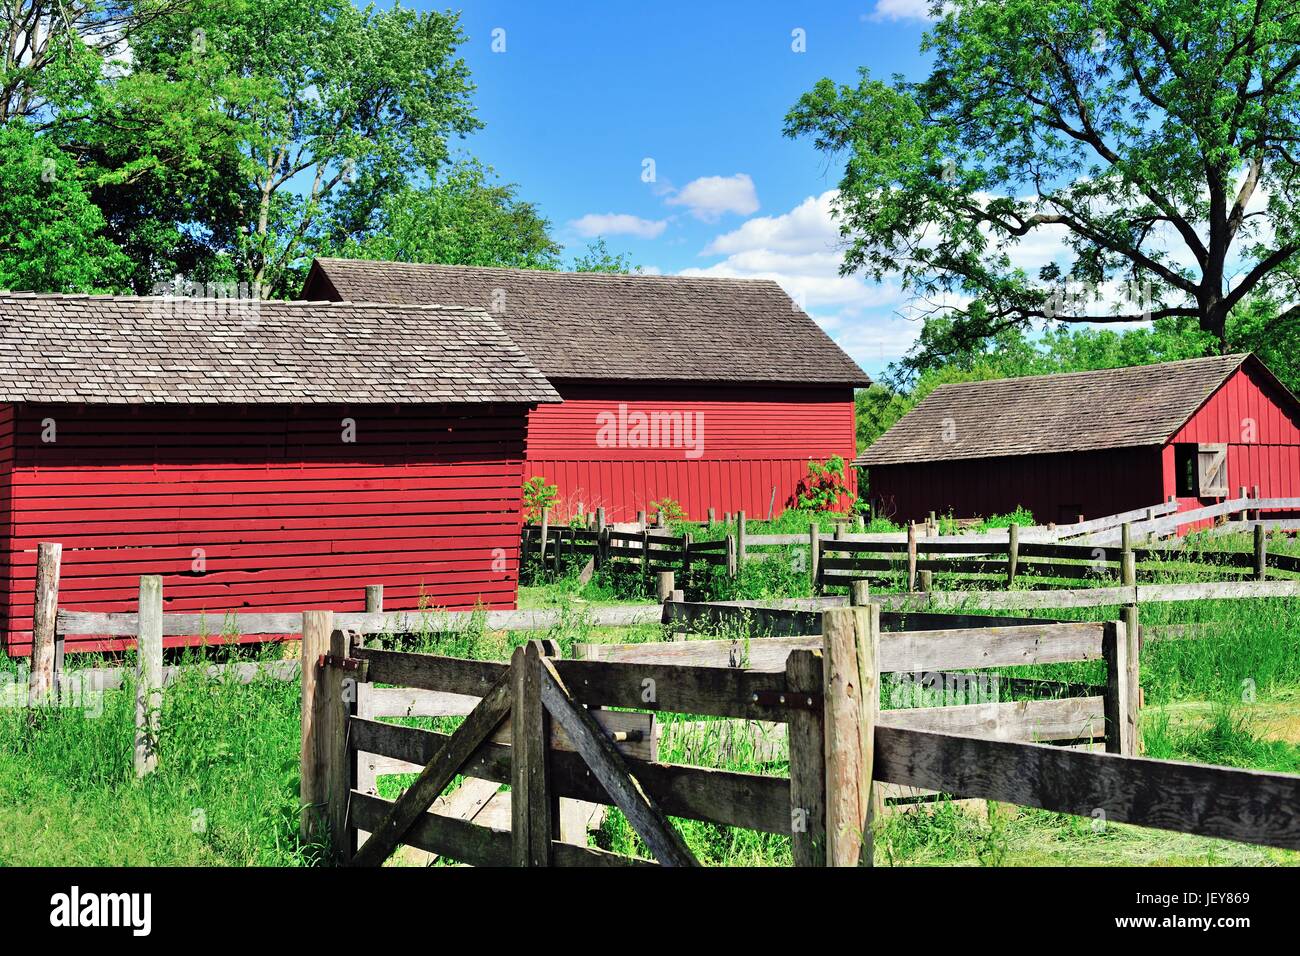 Venerable sheds and farm building at the Volkening Heritage Farm. The site has been preserved as an 1880s farm. Schaumburg, Illinois, USA. Stock Photo